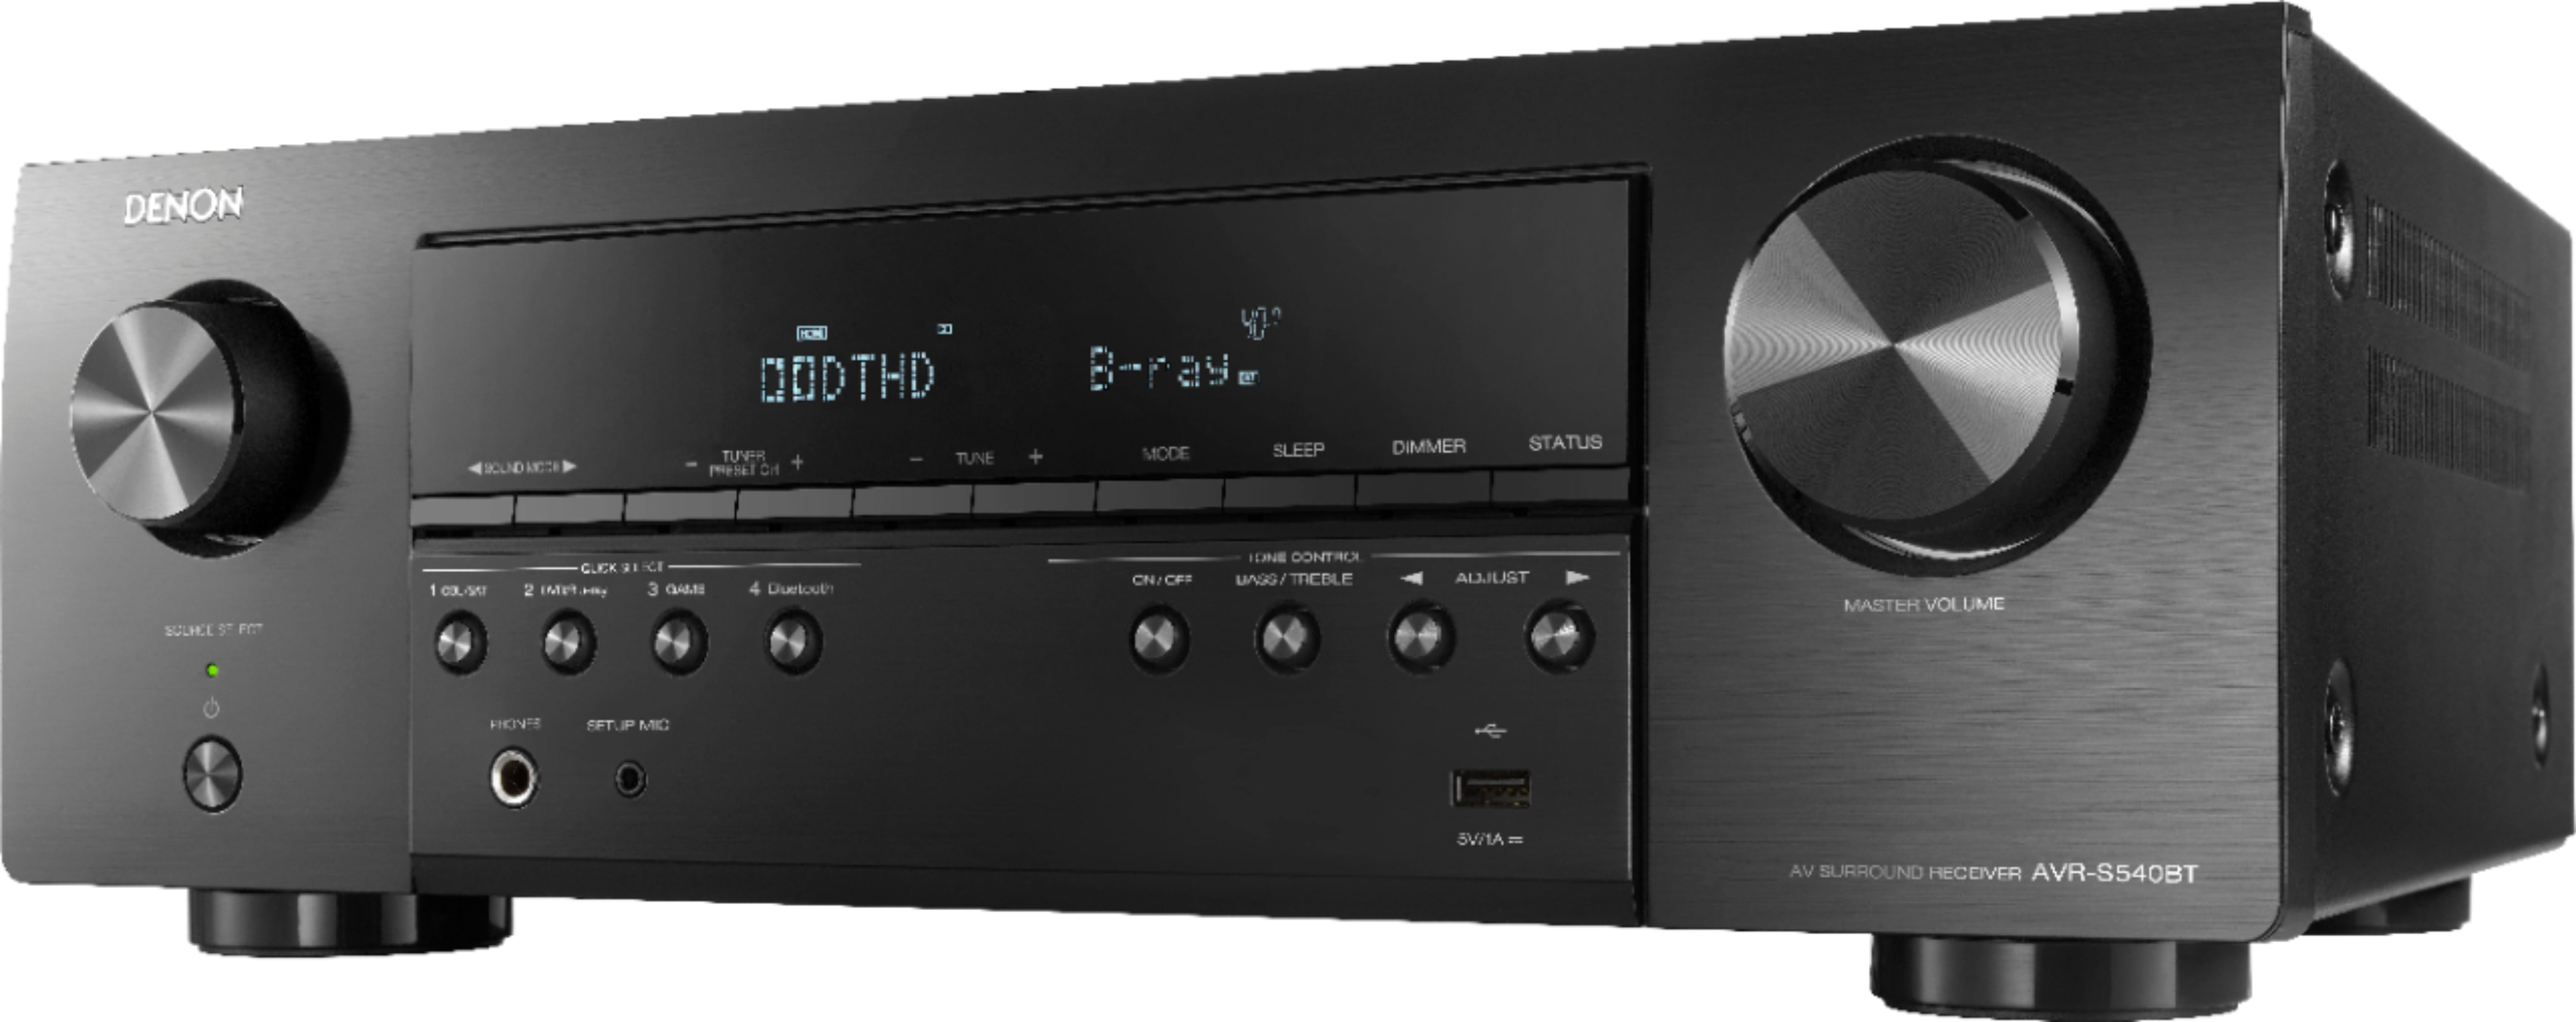 Left View: Denon - AVR-S540BT Receiver, 5.2 channel, 4K Ultra HD Audio and Video, Home Theater System, built-in Bluetooth and USB - Black